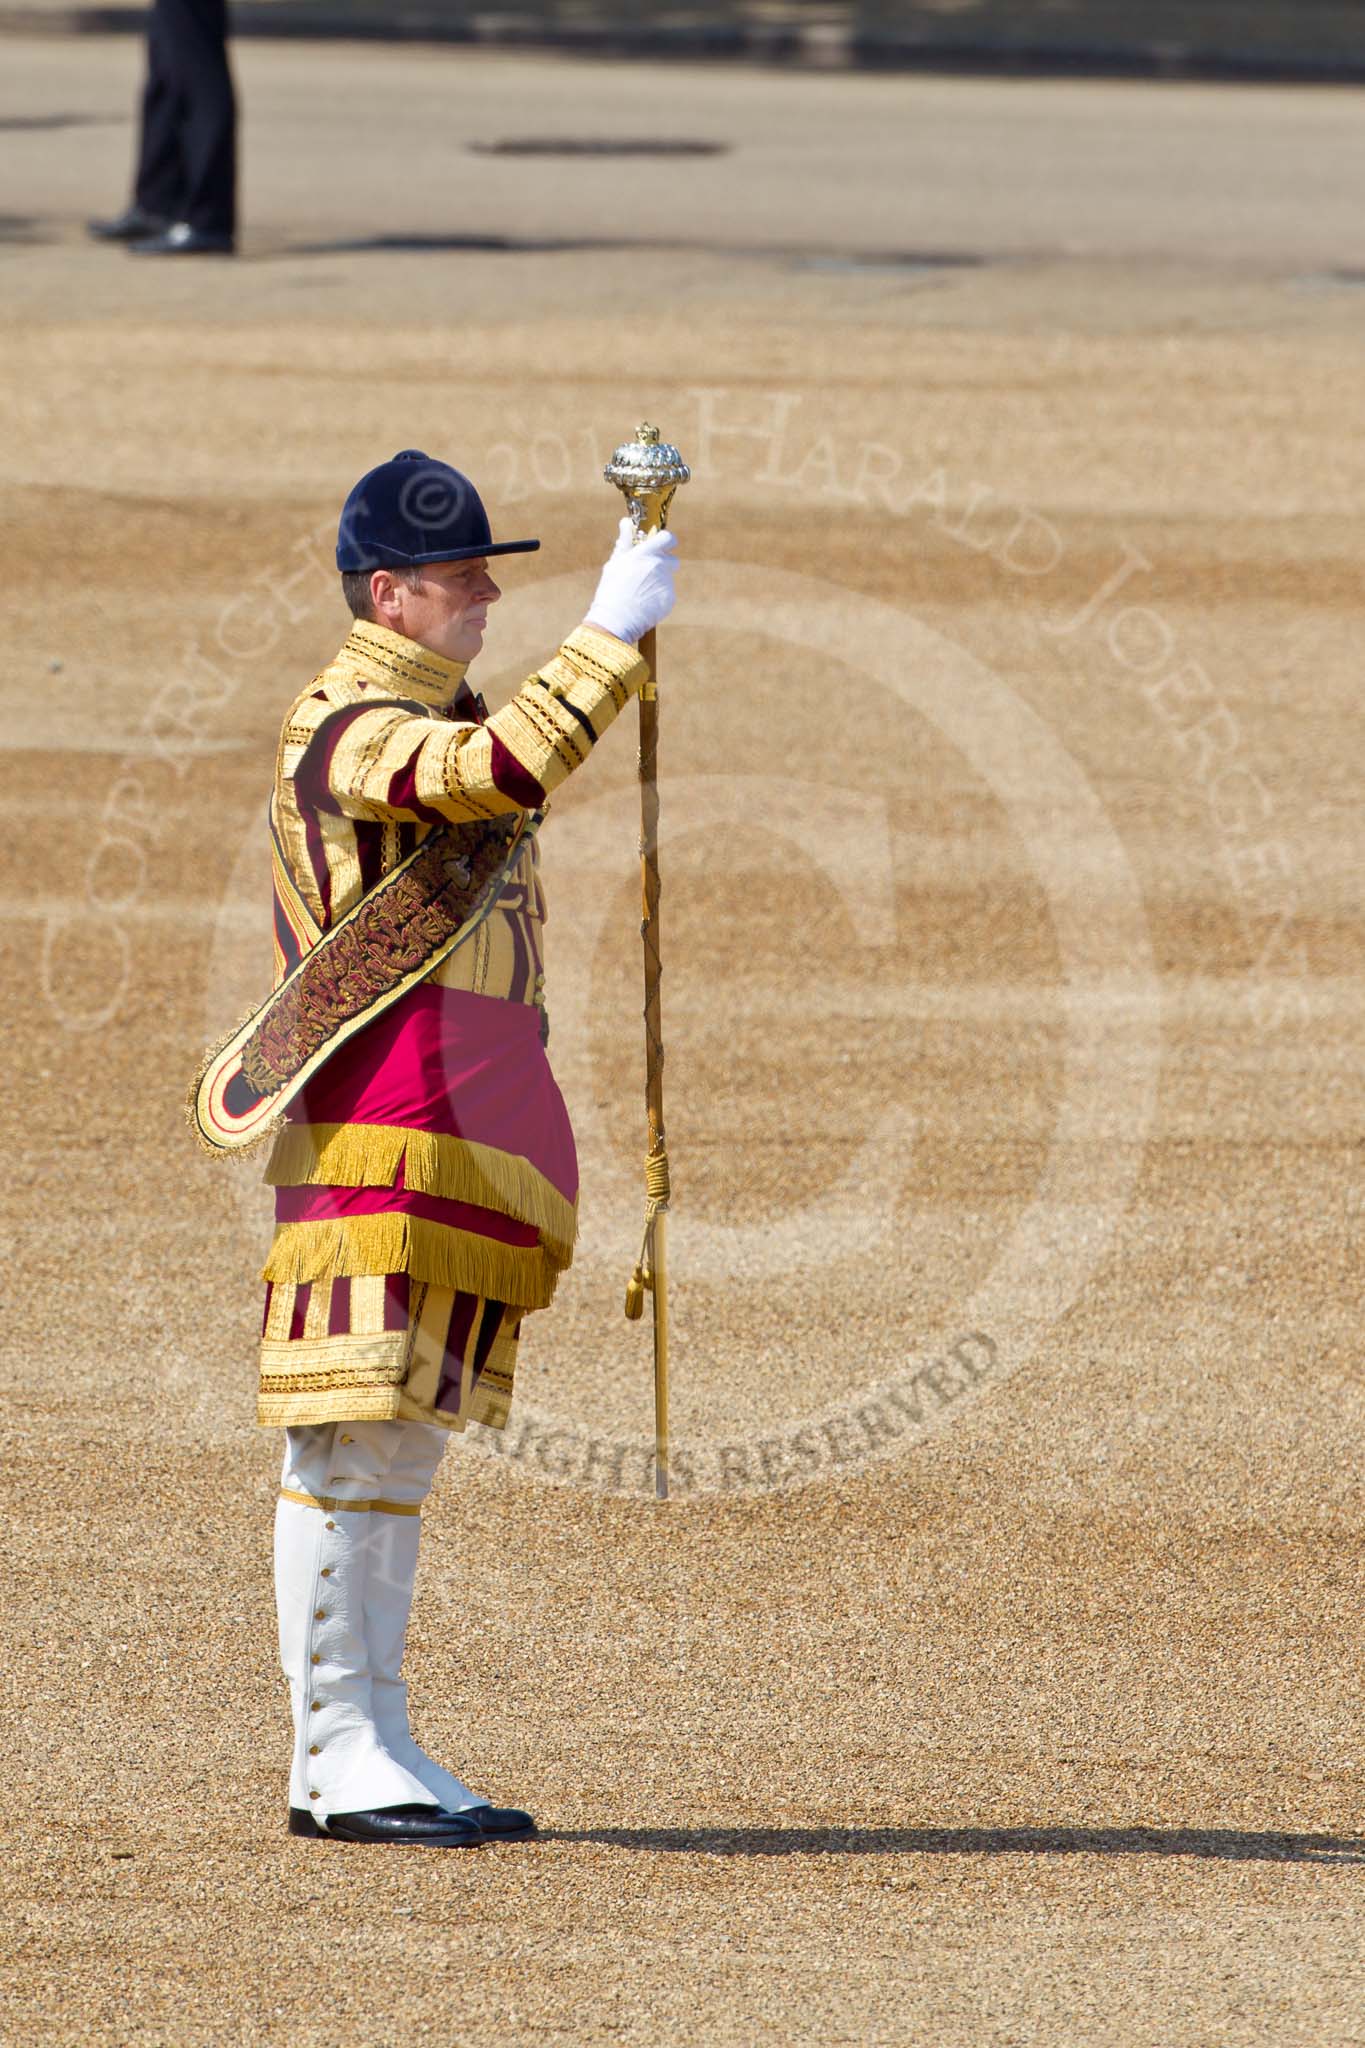 The Colonel's Review 2011: Drum Major Tony Taylor, No. 7 Company Coldstream Guards..
Horse Guards Parade, Westminster,
London SW1,

United Kingdom,
on 04 June 2011 at 10:19, image #17